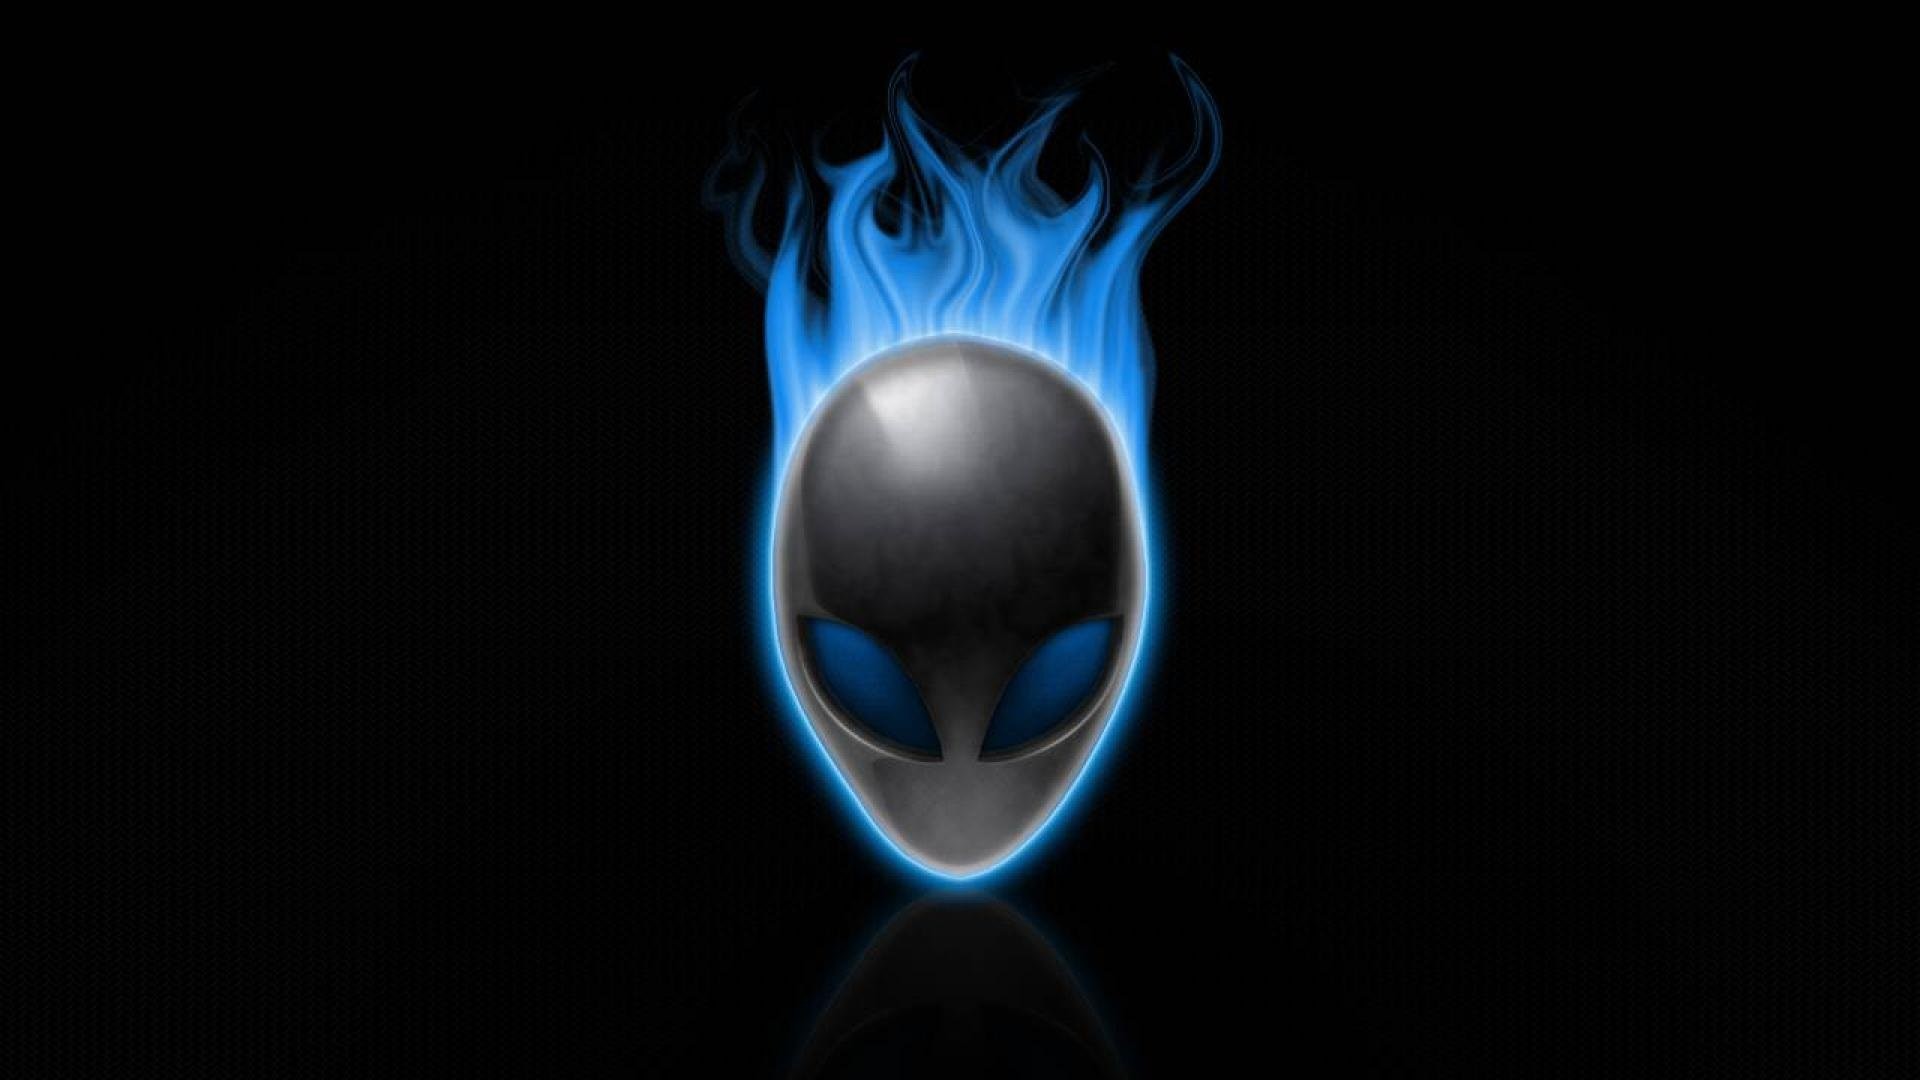 Dell Alienware Wallpaper High Quality Resolution with HD Wallpaper Resolution px 101.55 KB Computer 1920×1080